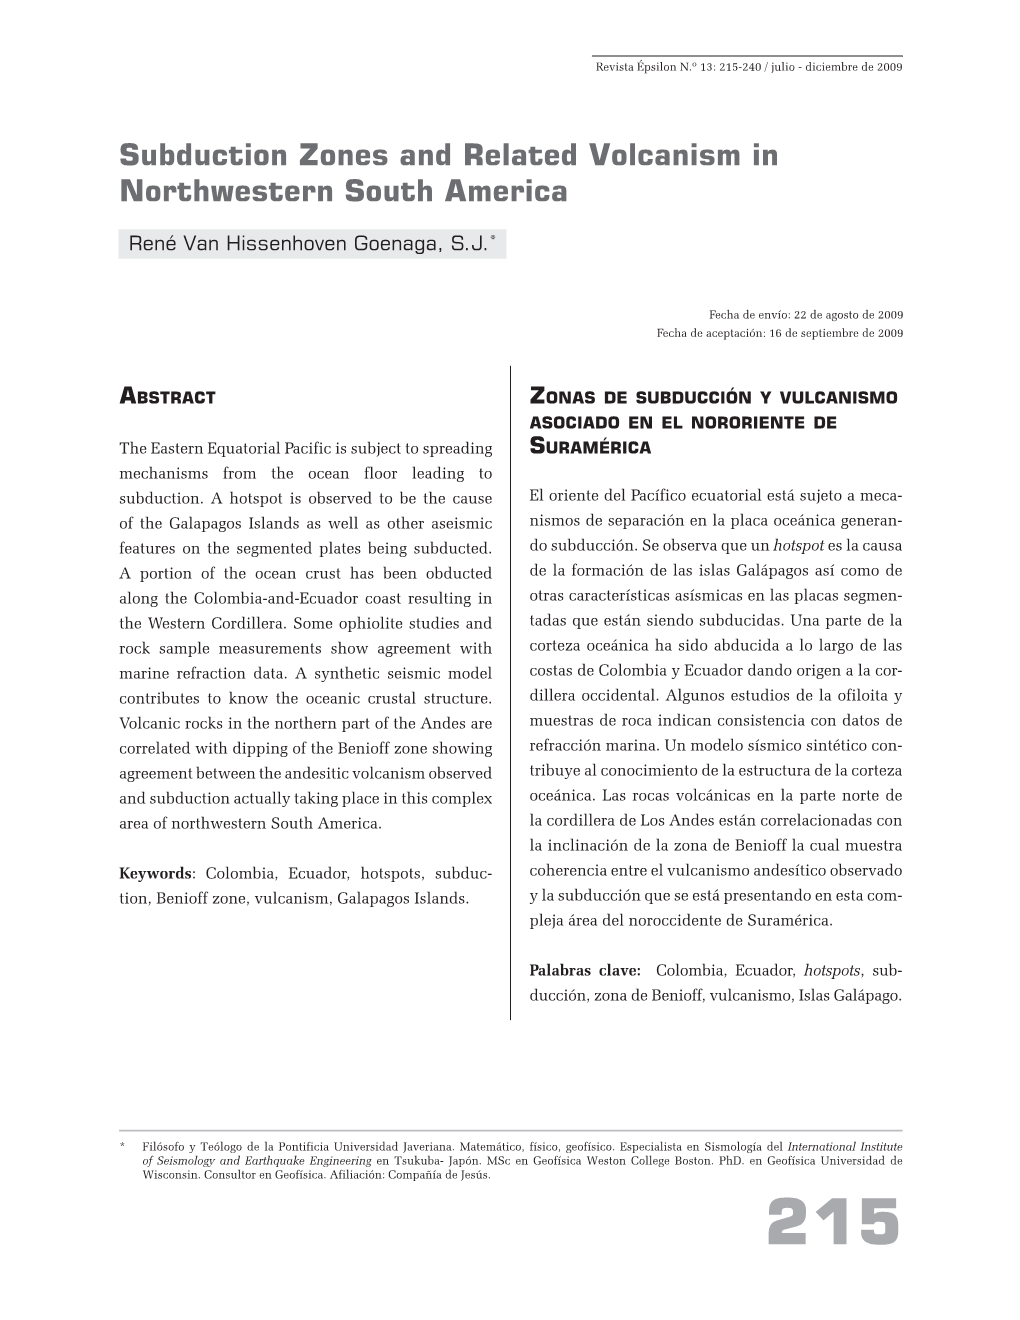 Subduction Zones and Related Volcanism in Northwestern South America